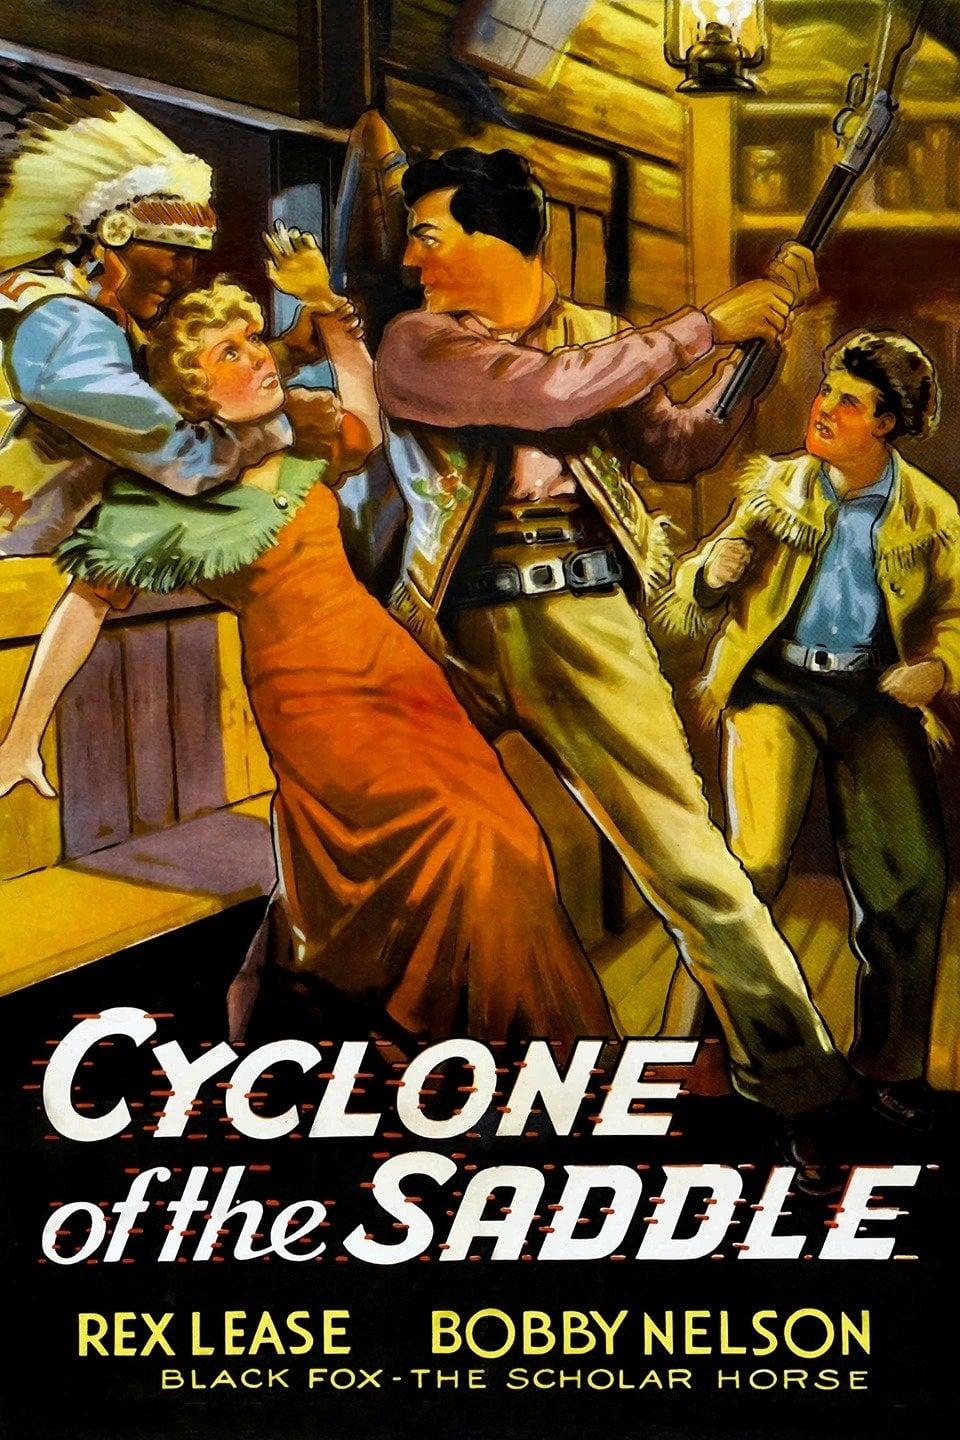 Cyclone of the Saddle poster